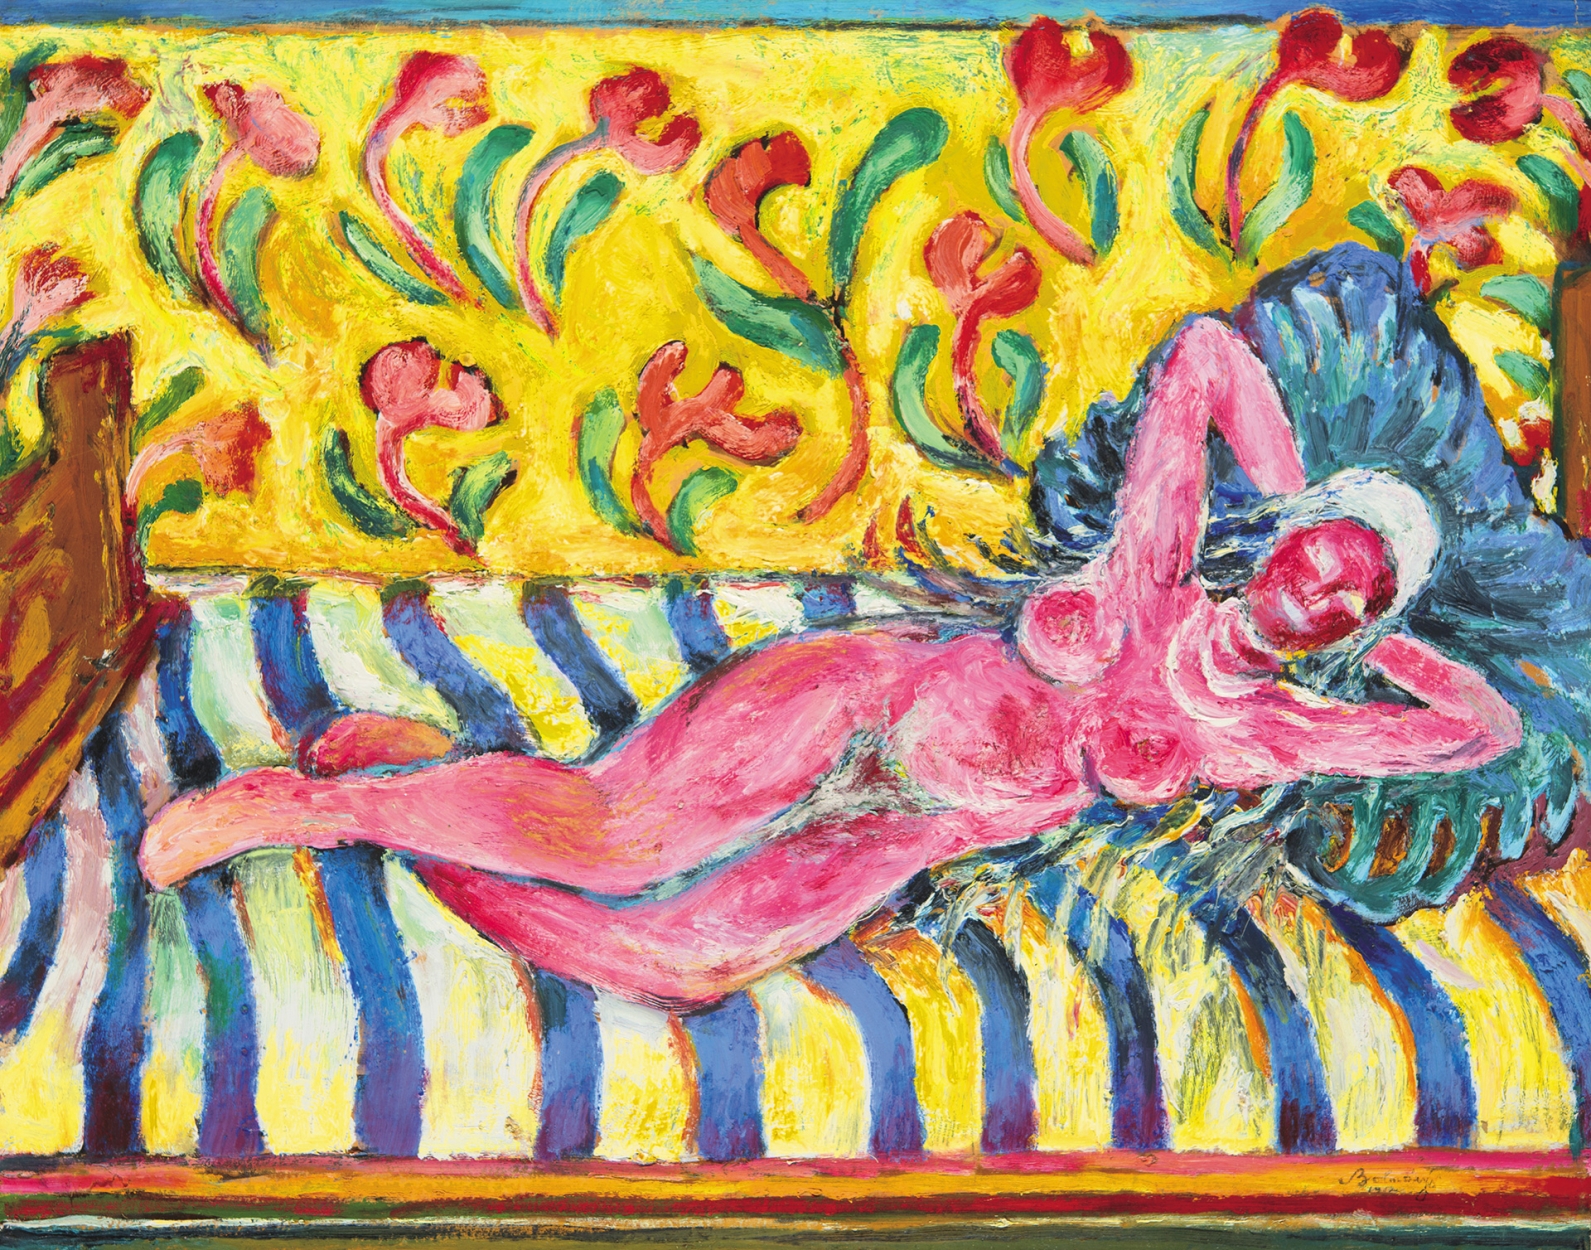 Bolmányi Ferenc (1904-1990) Red Nude lying on a Striped Sofa, 1952